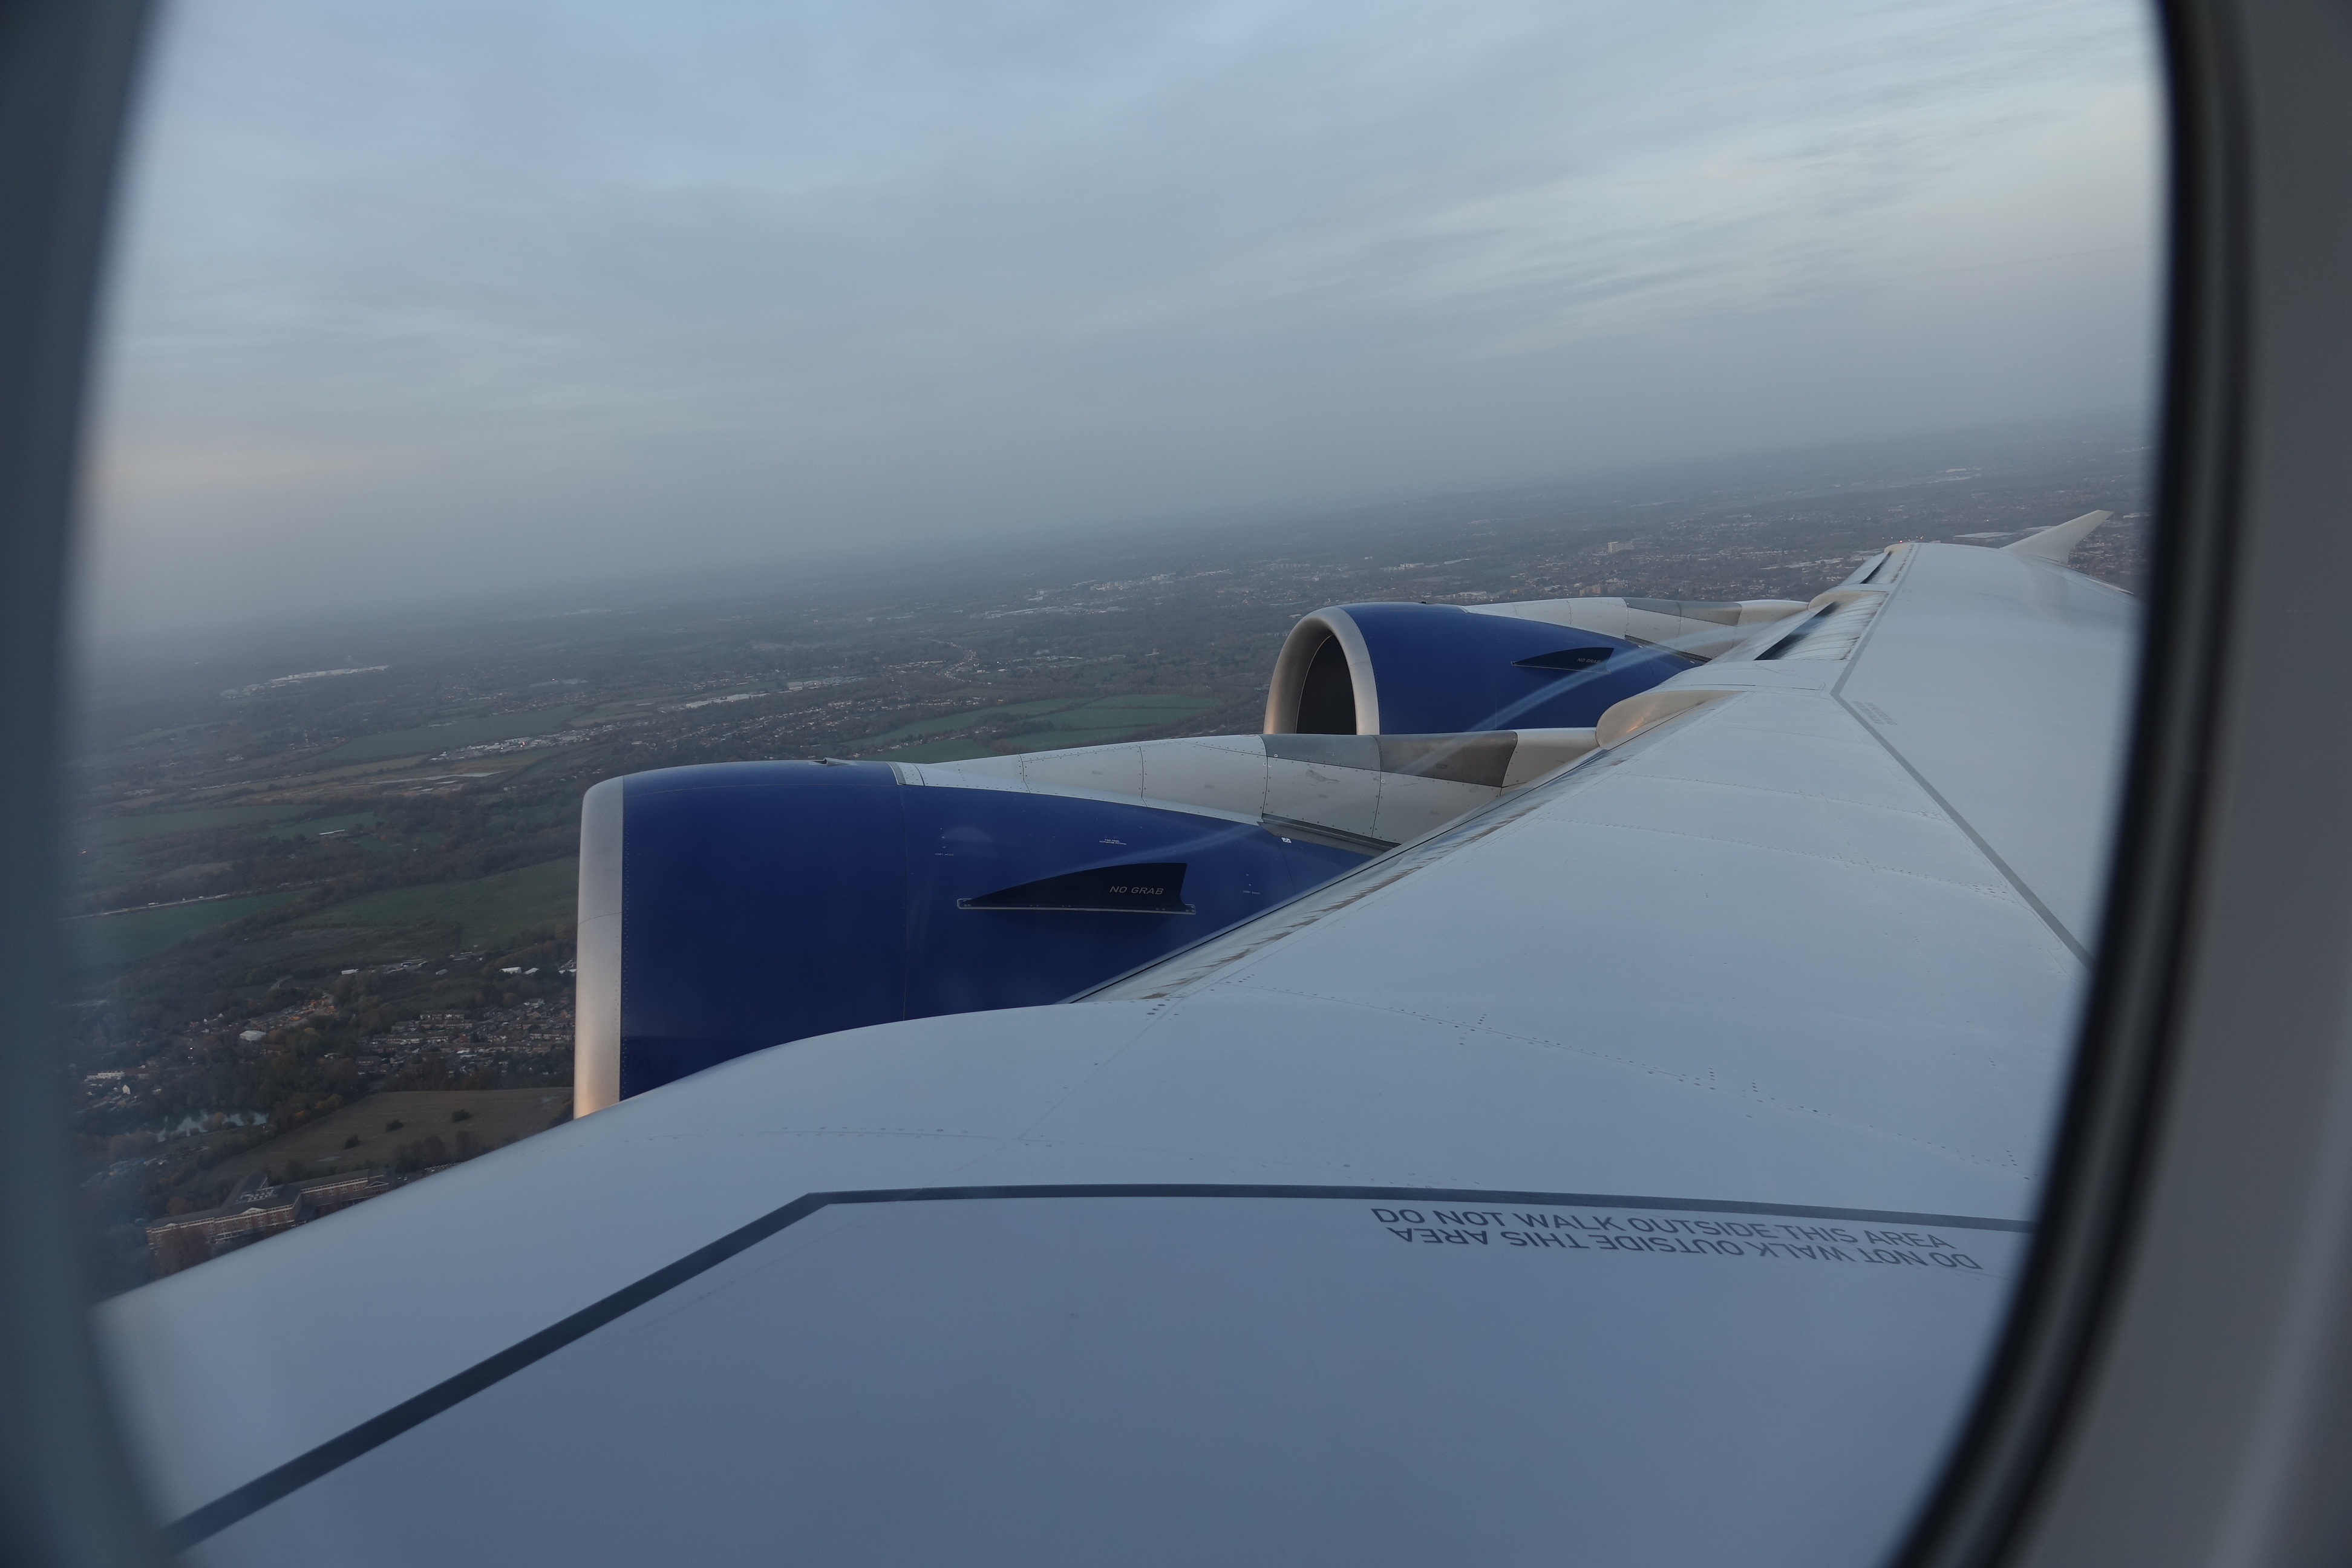 an airplane wing with blue and white engines